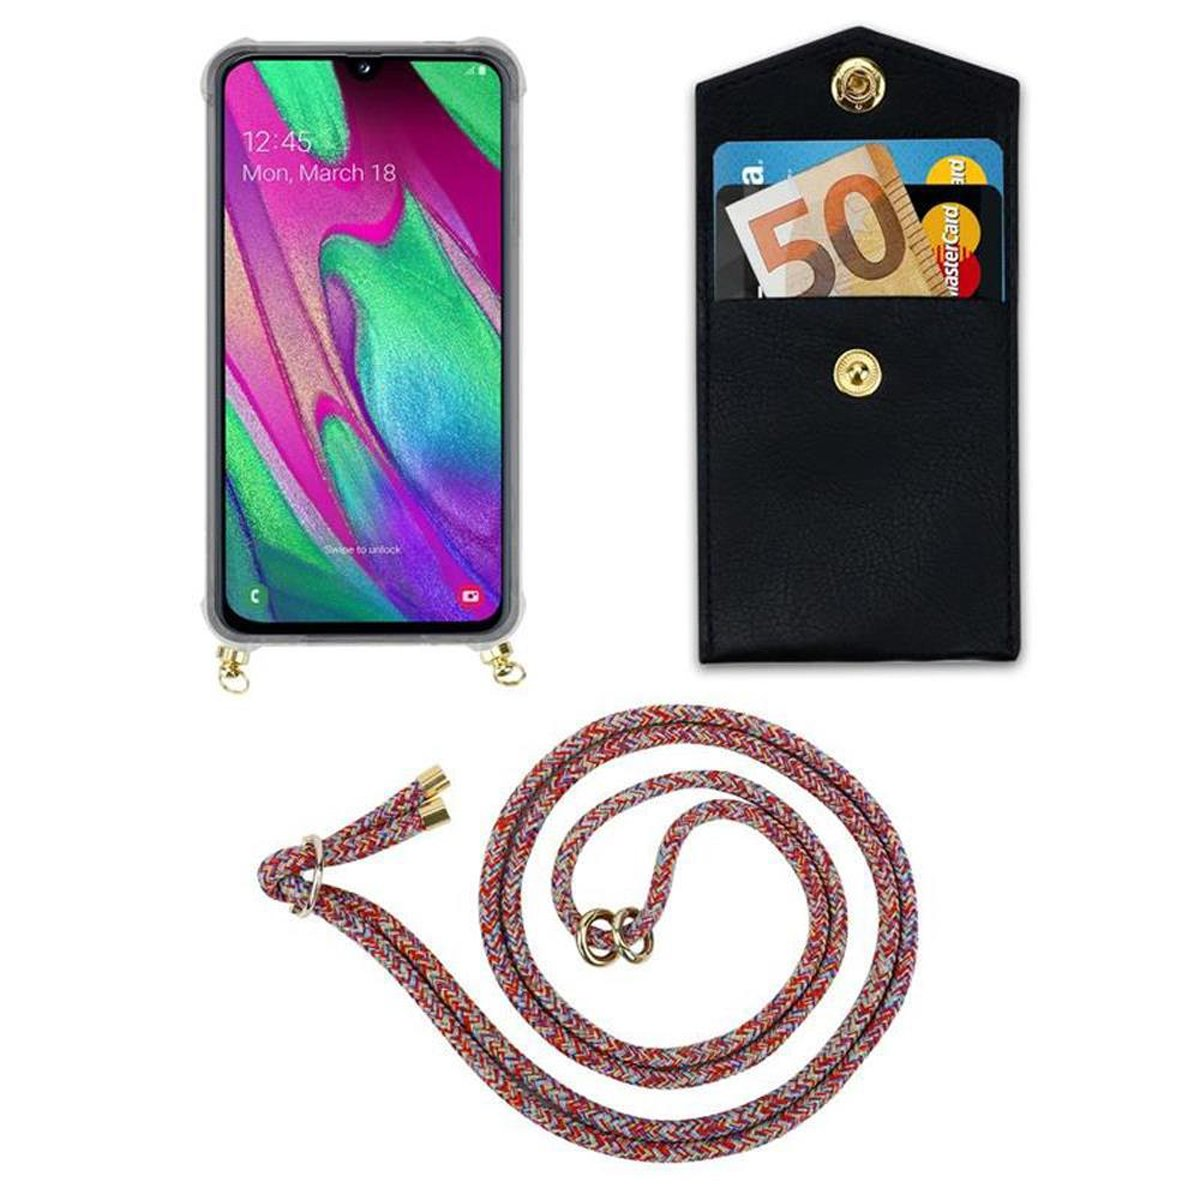 CADORABO Handy Kette mit Band Gold und Galaxy A40, Backcover, abnehmbarer Kordel COLORFUL Hülle, PARROT Ringen, Samsung